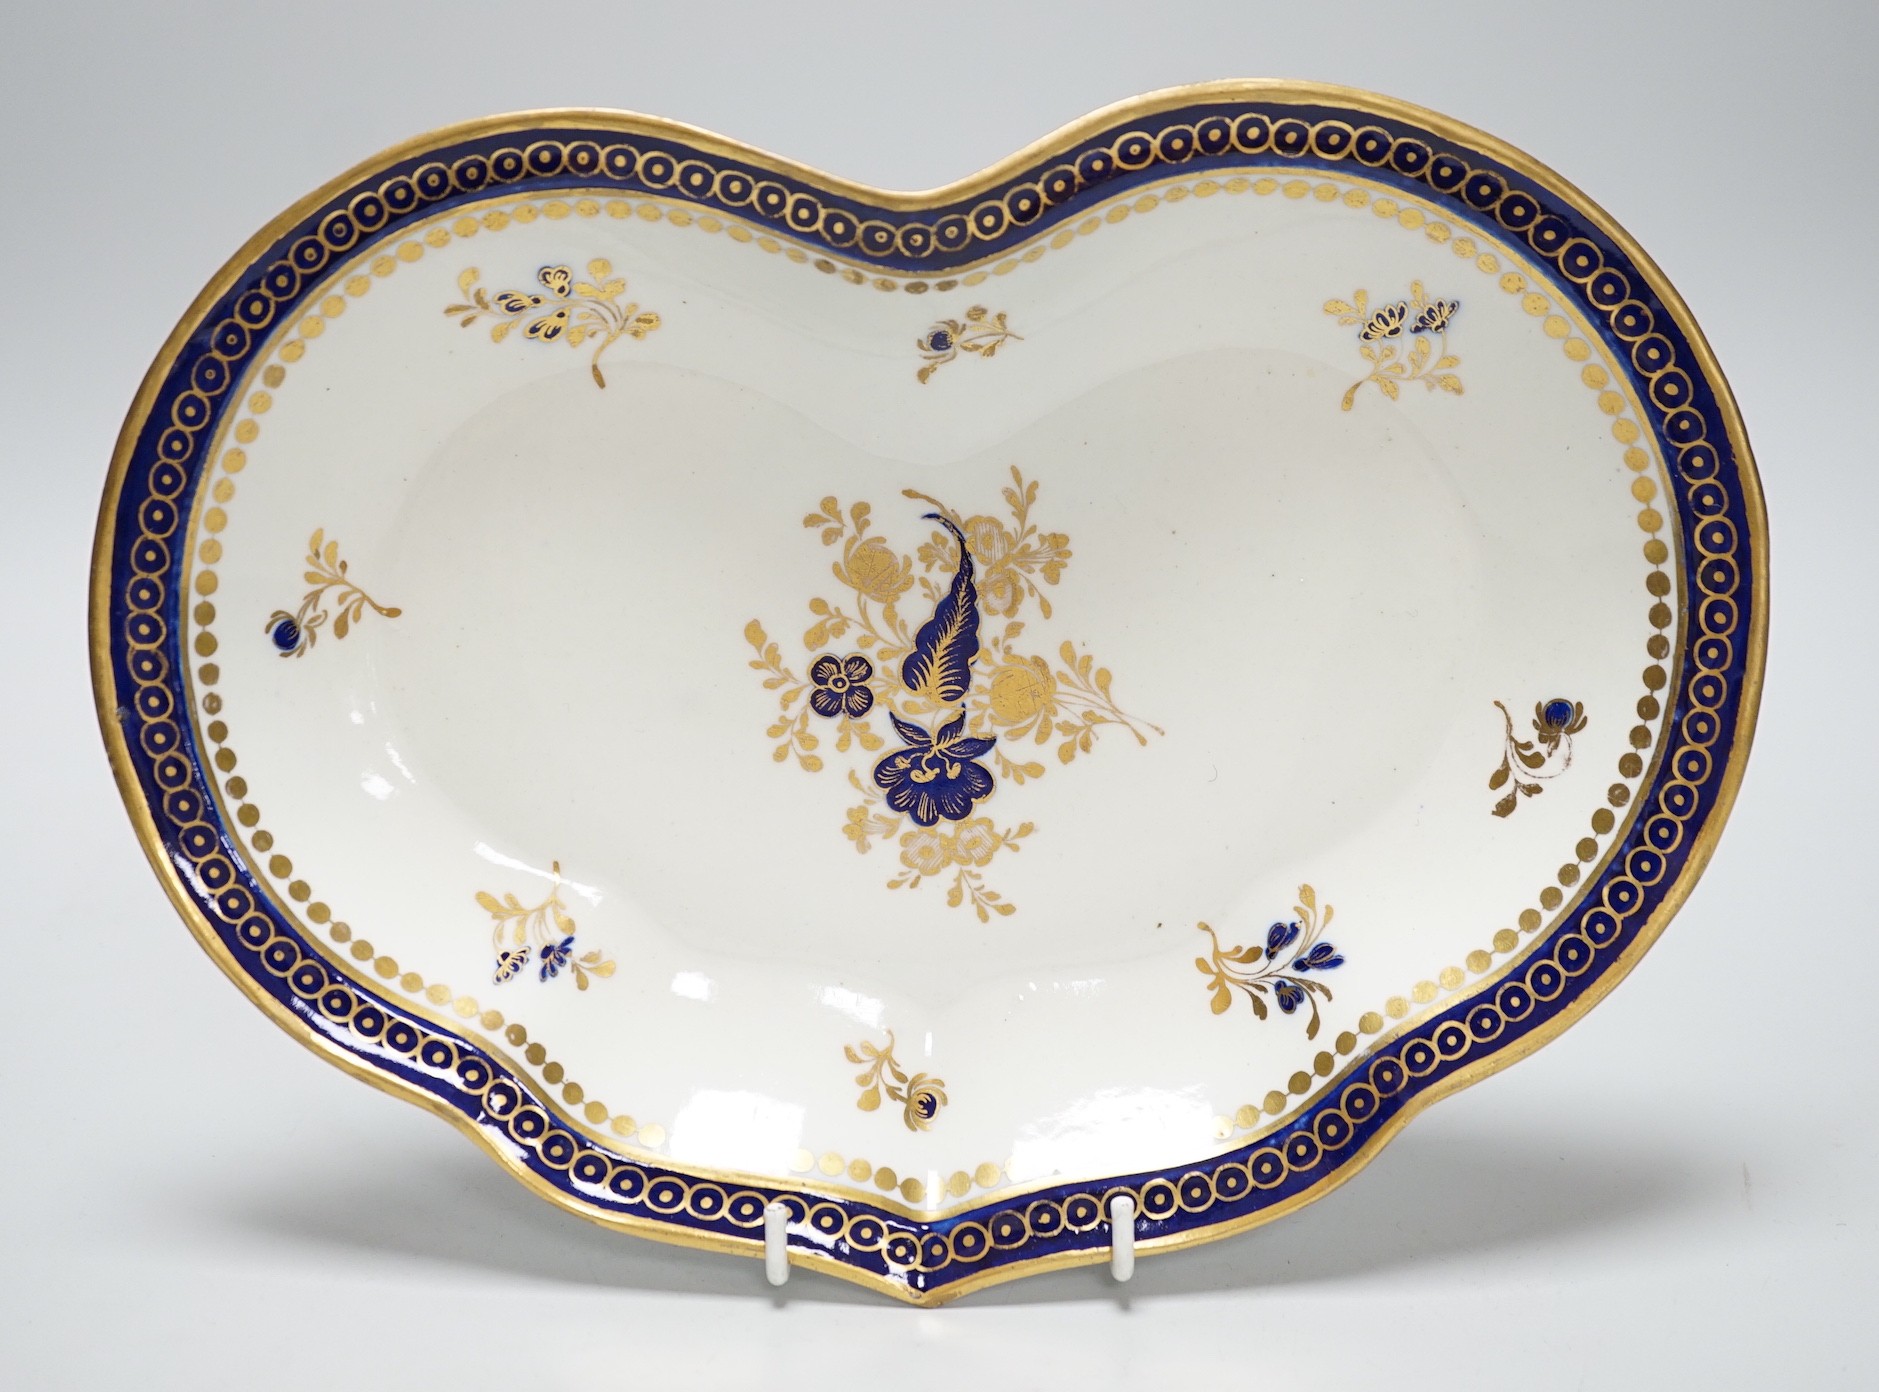 An 18th century Caughley kidney shaped dish with blue and gilt decoration, 28cms wide